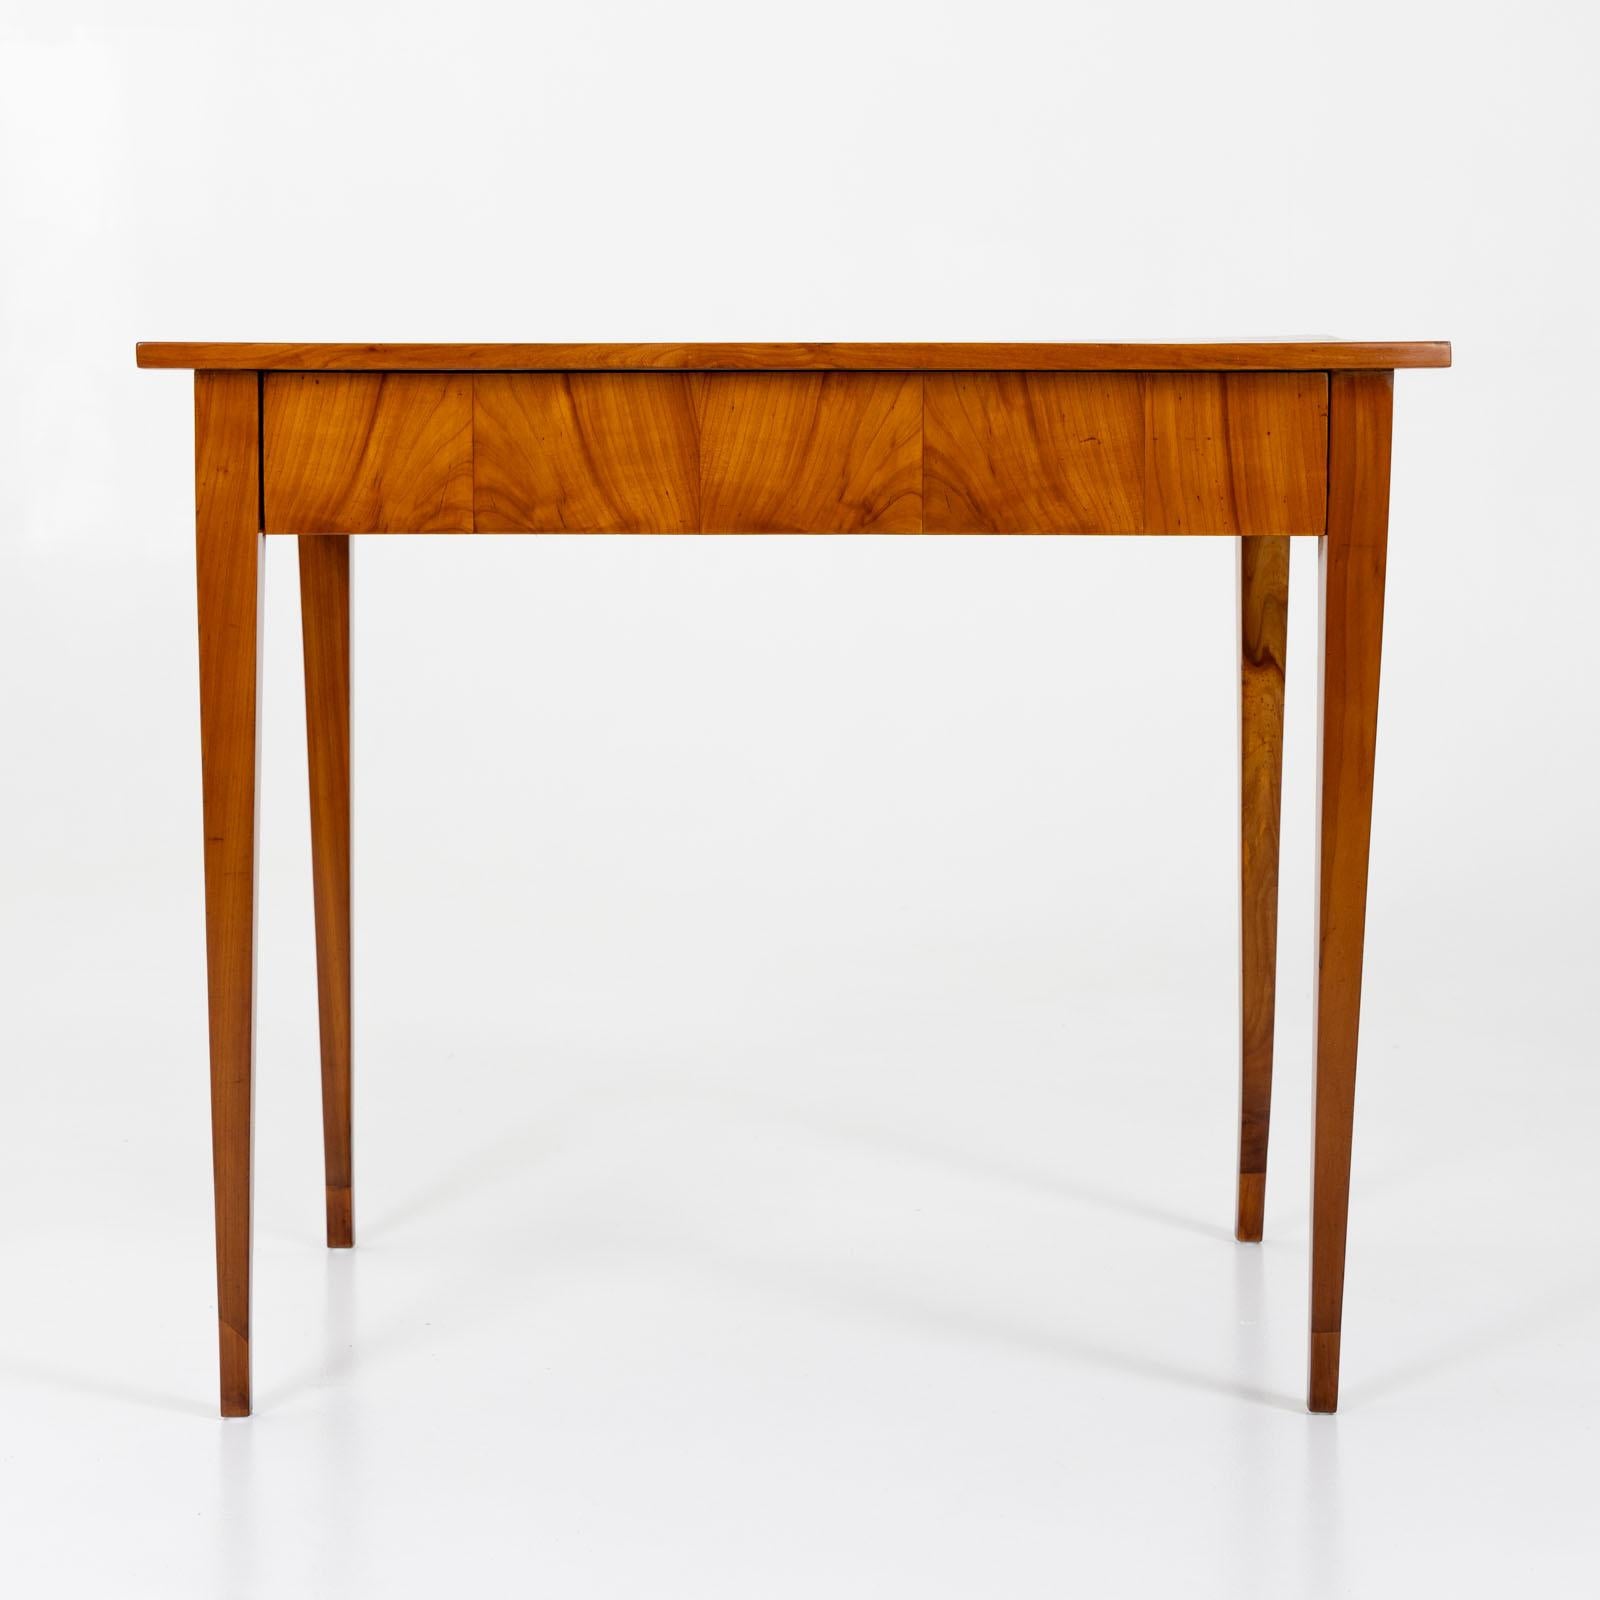 Polished Biedermeier Side Table in Cherry, South German around 1820 For Sale